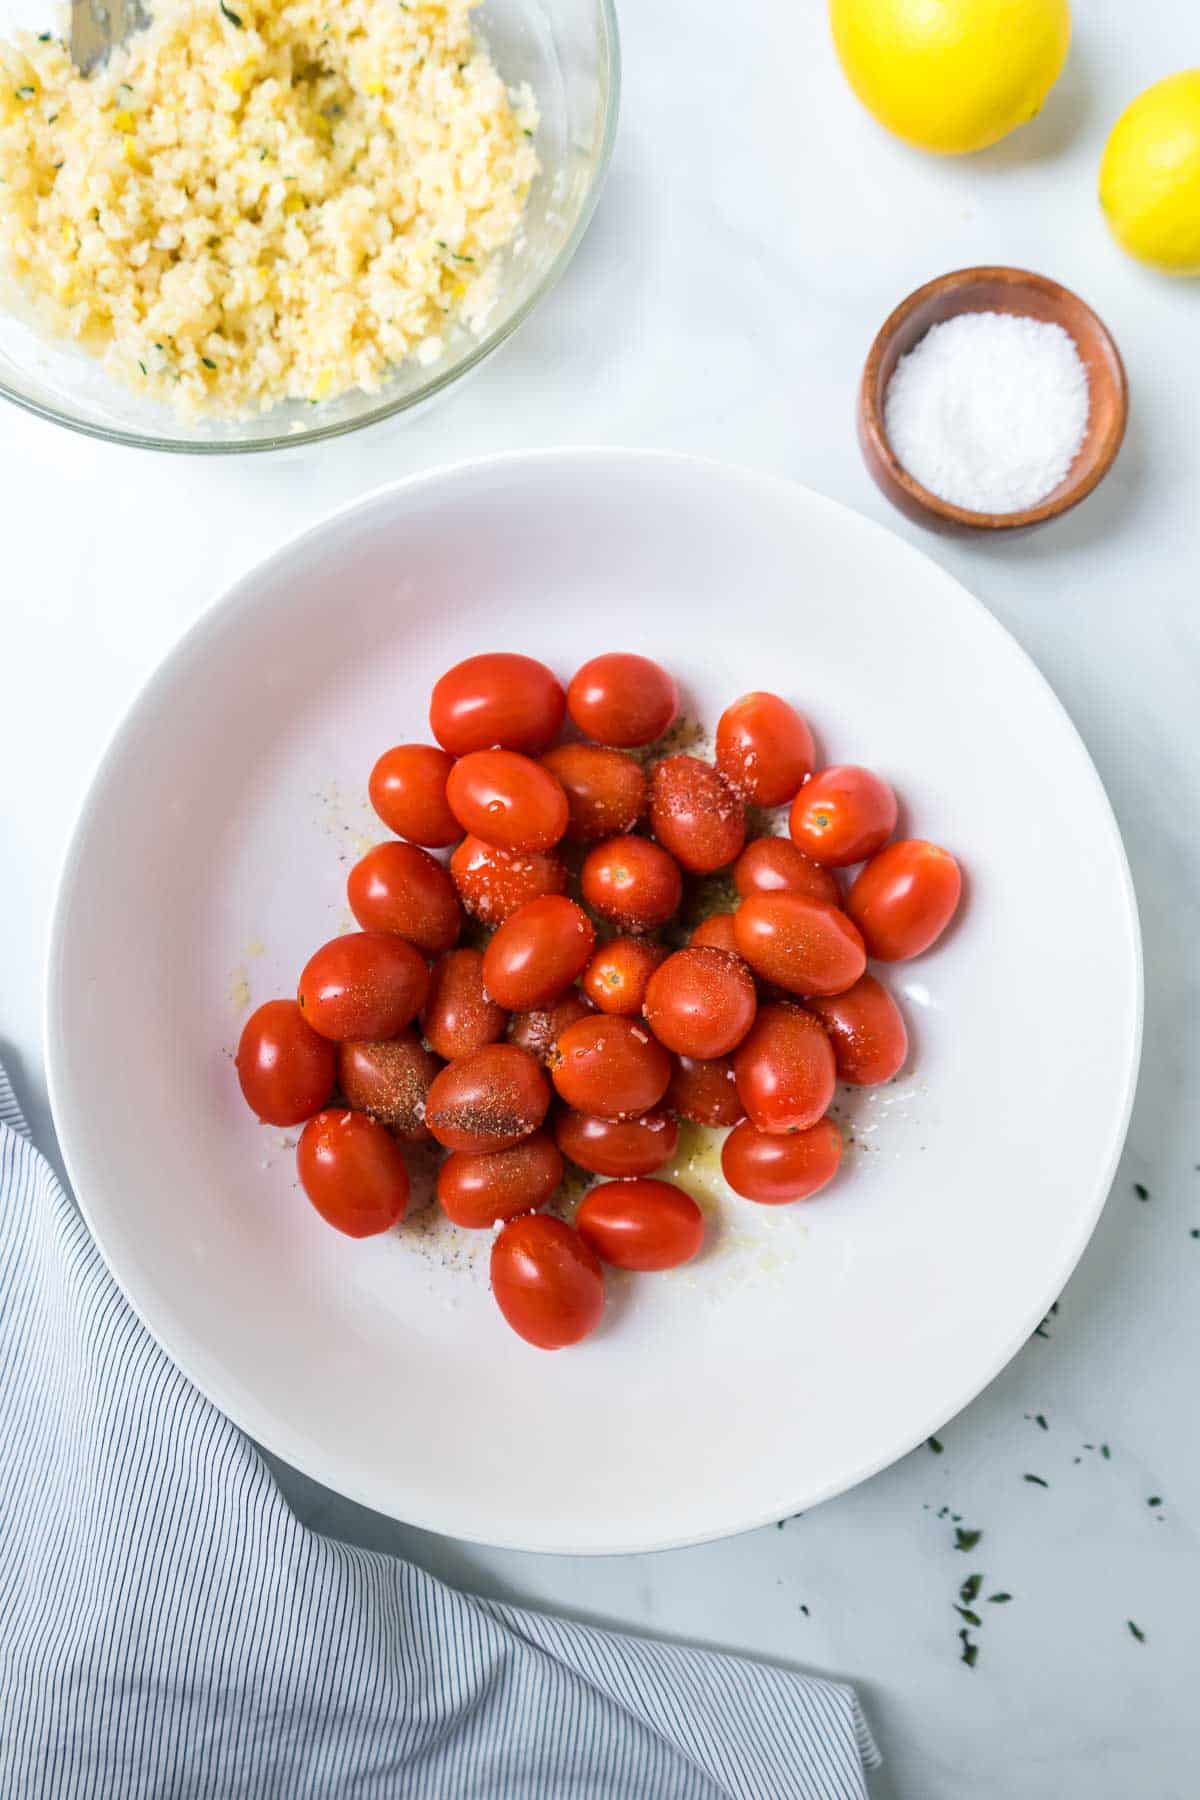 Cherry tomatoes being tossed with olive oil and spices.